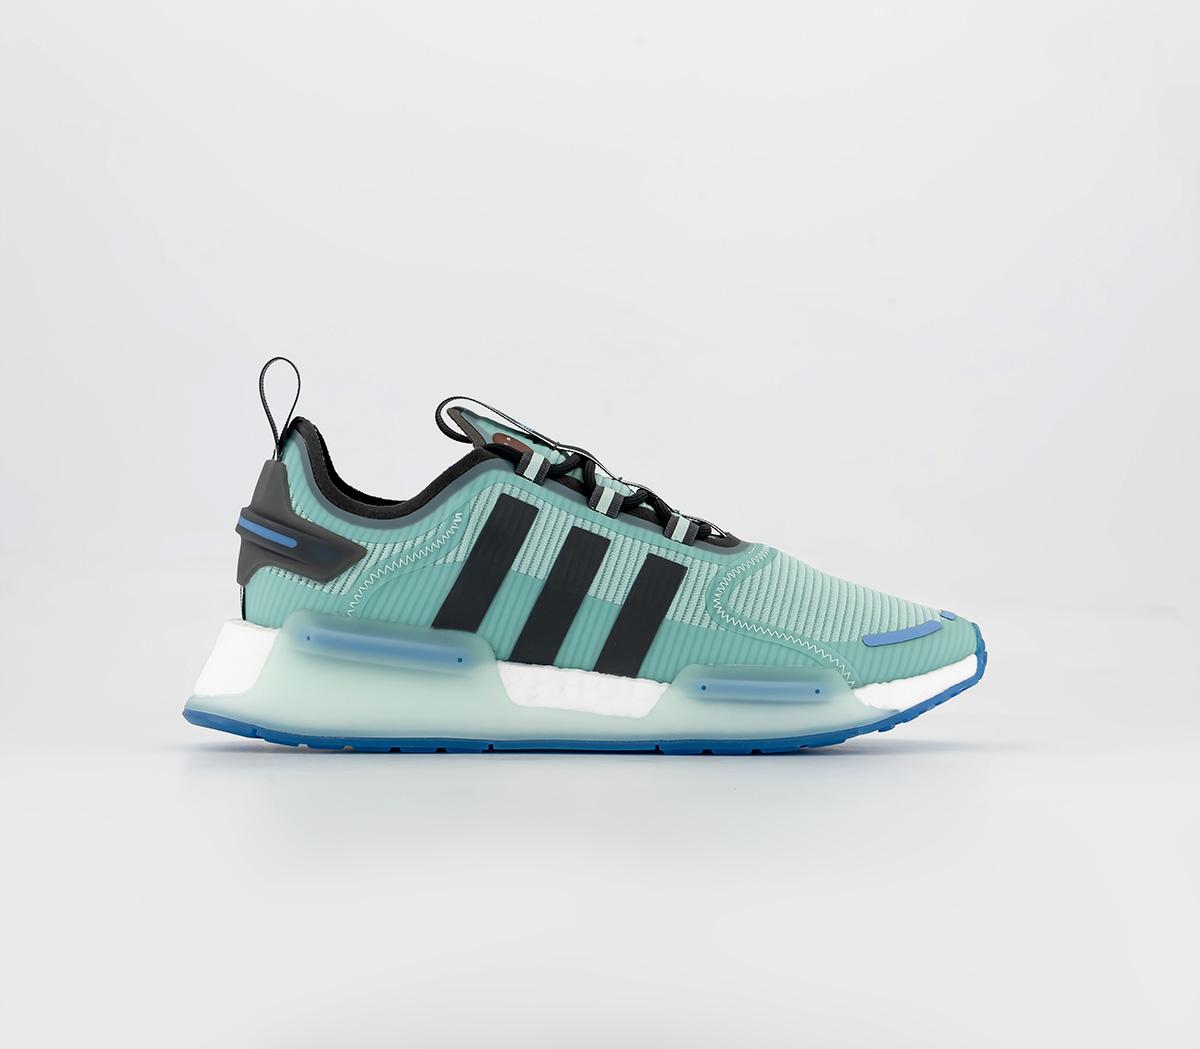 adidasNMD_V3 TrainersXbox Ice Green Carbon Mint